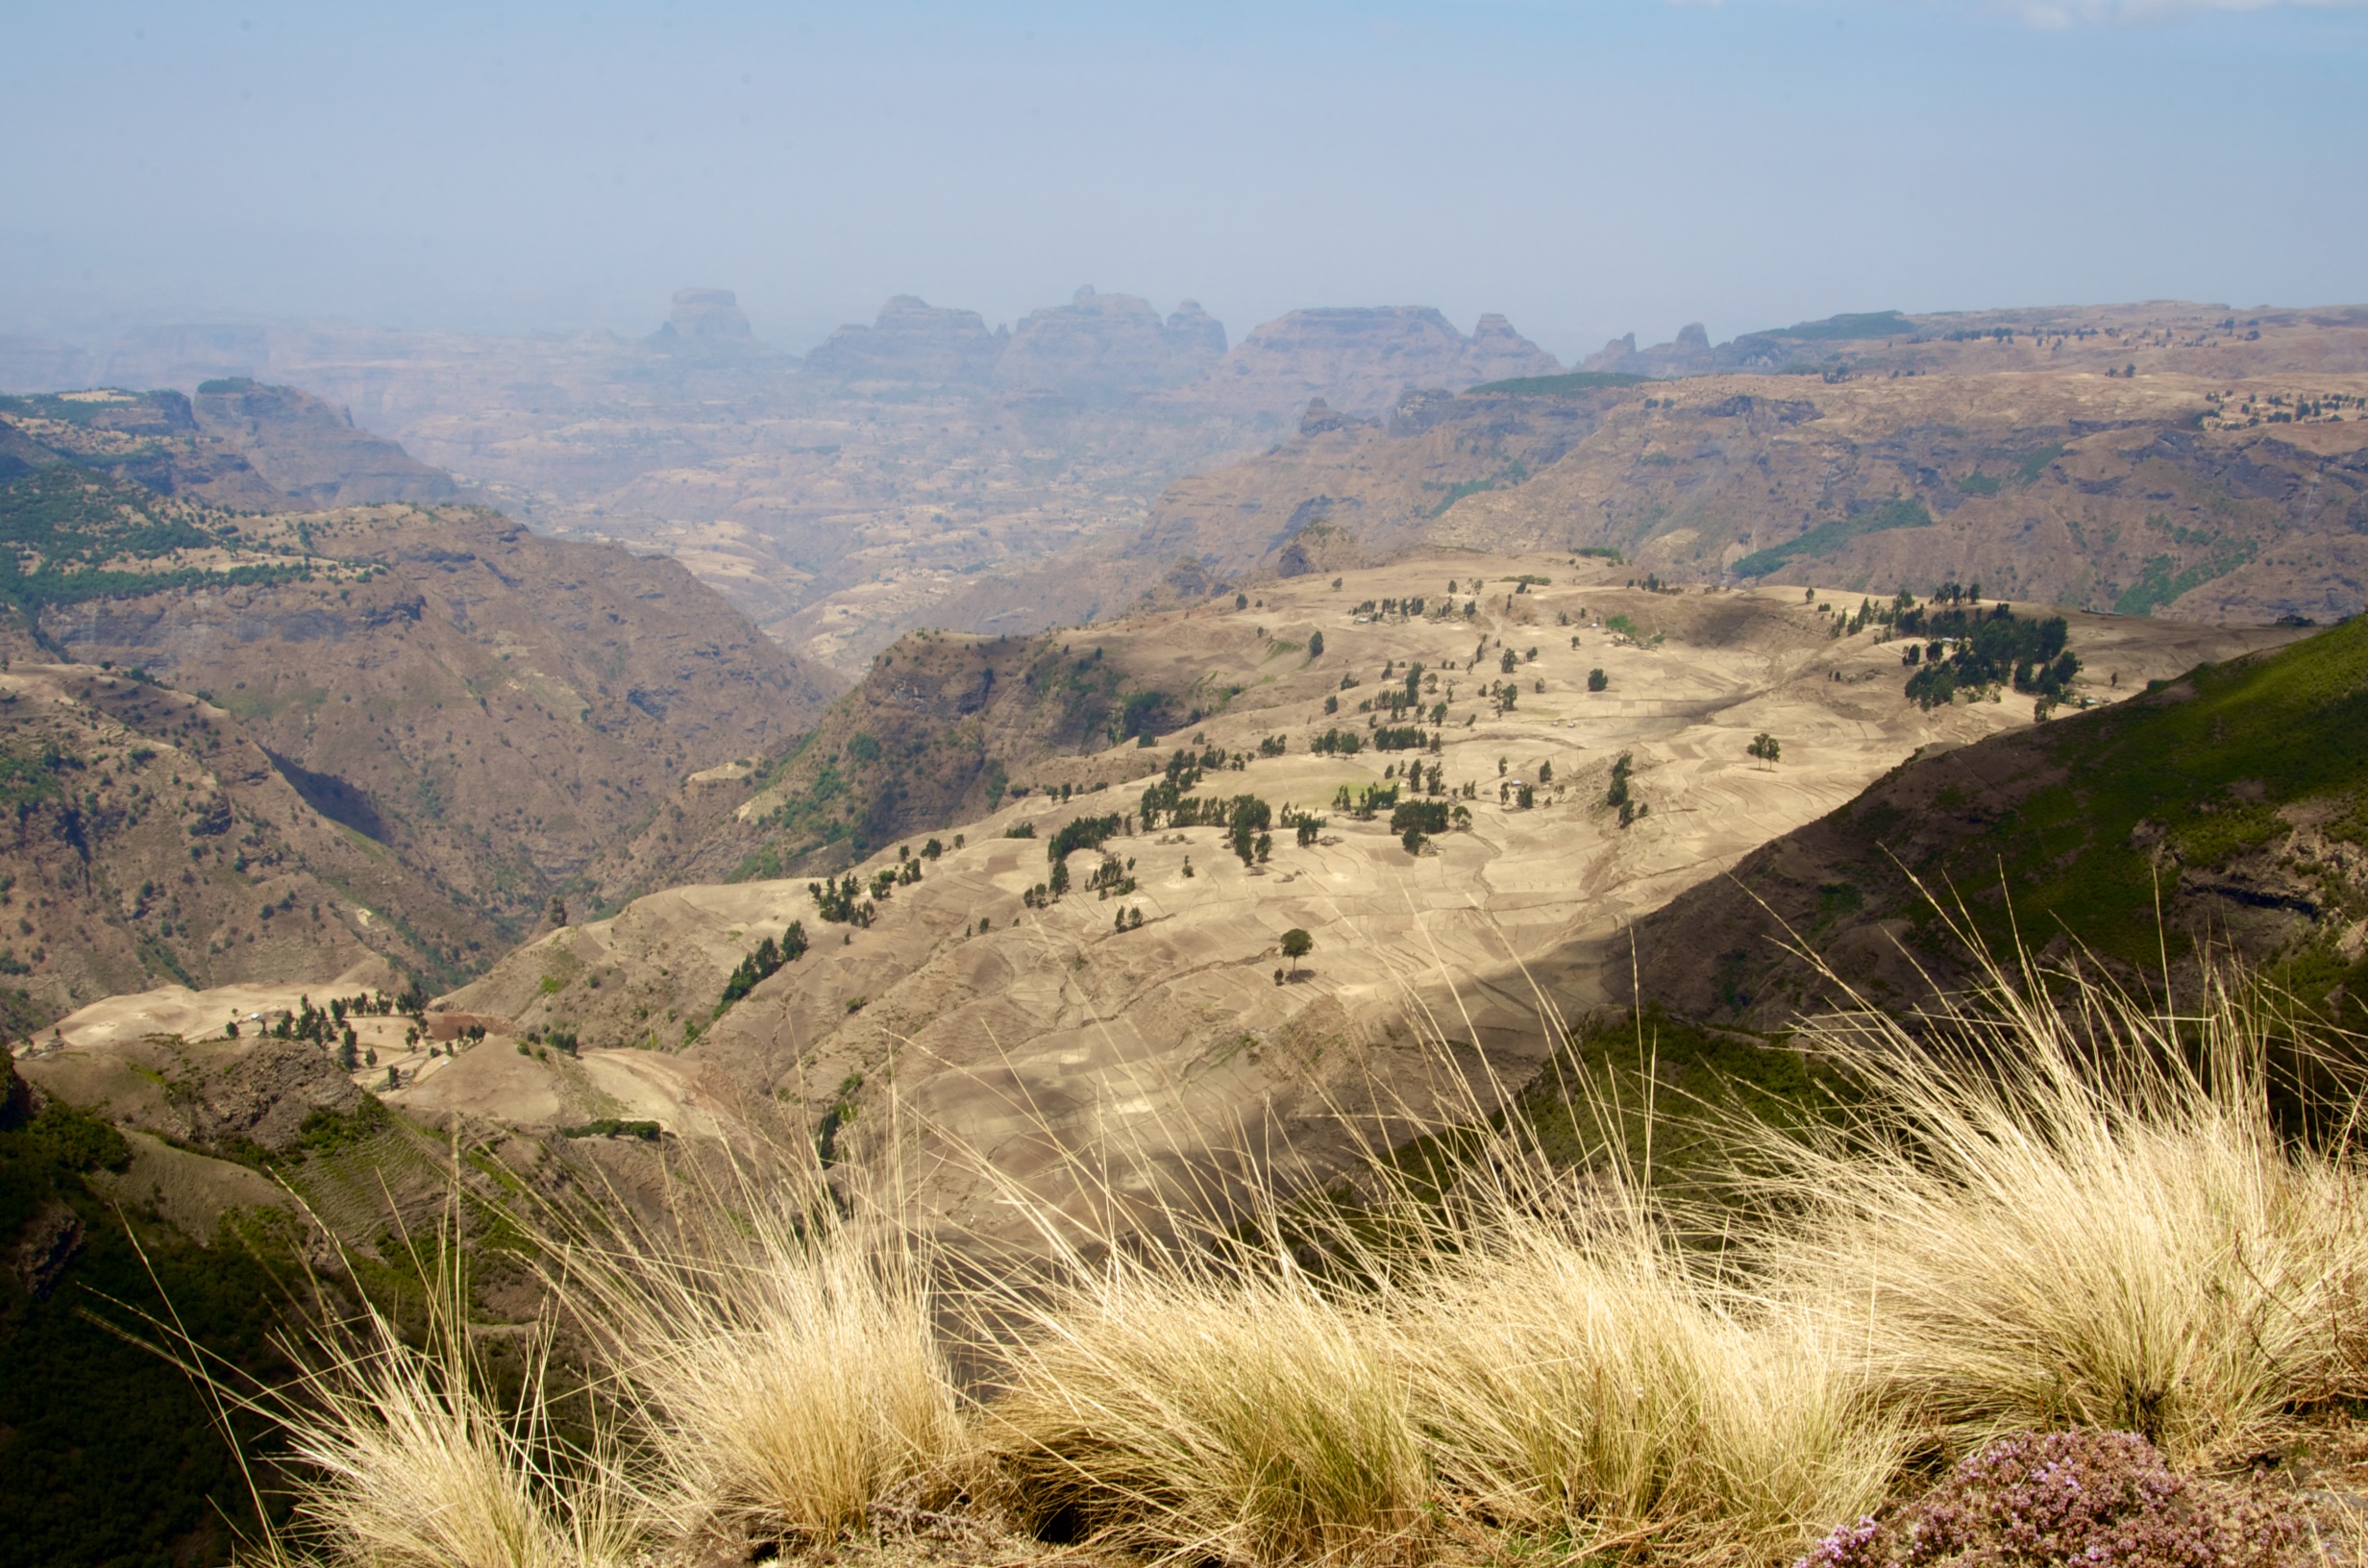  Valley, Simien Mountains NP 